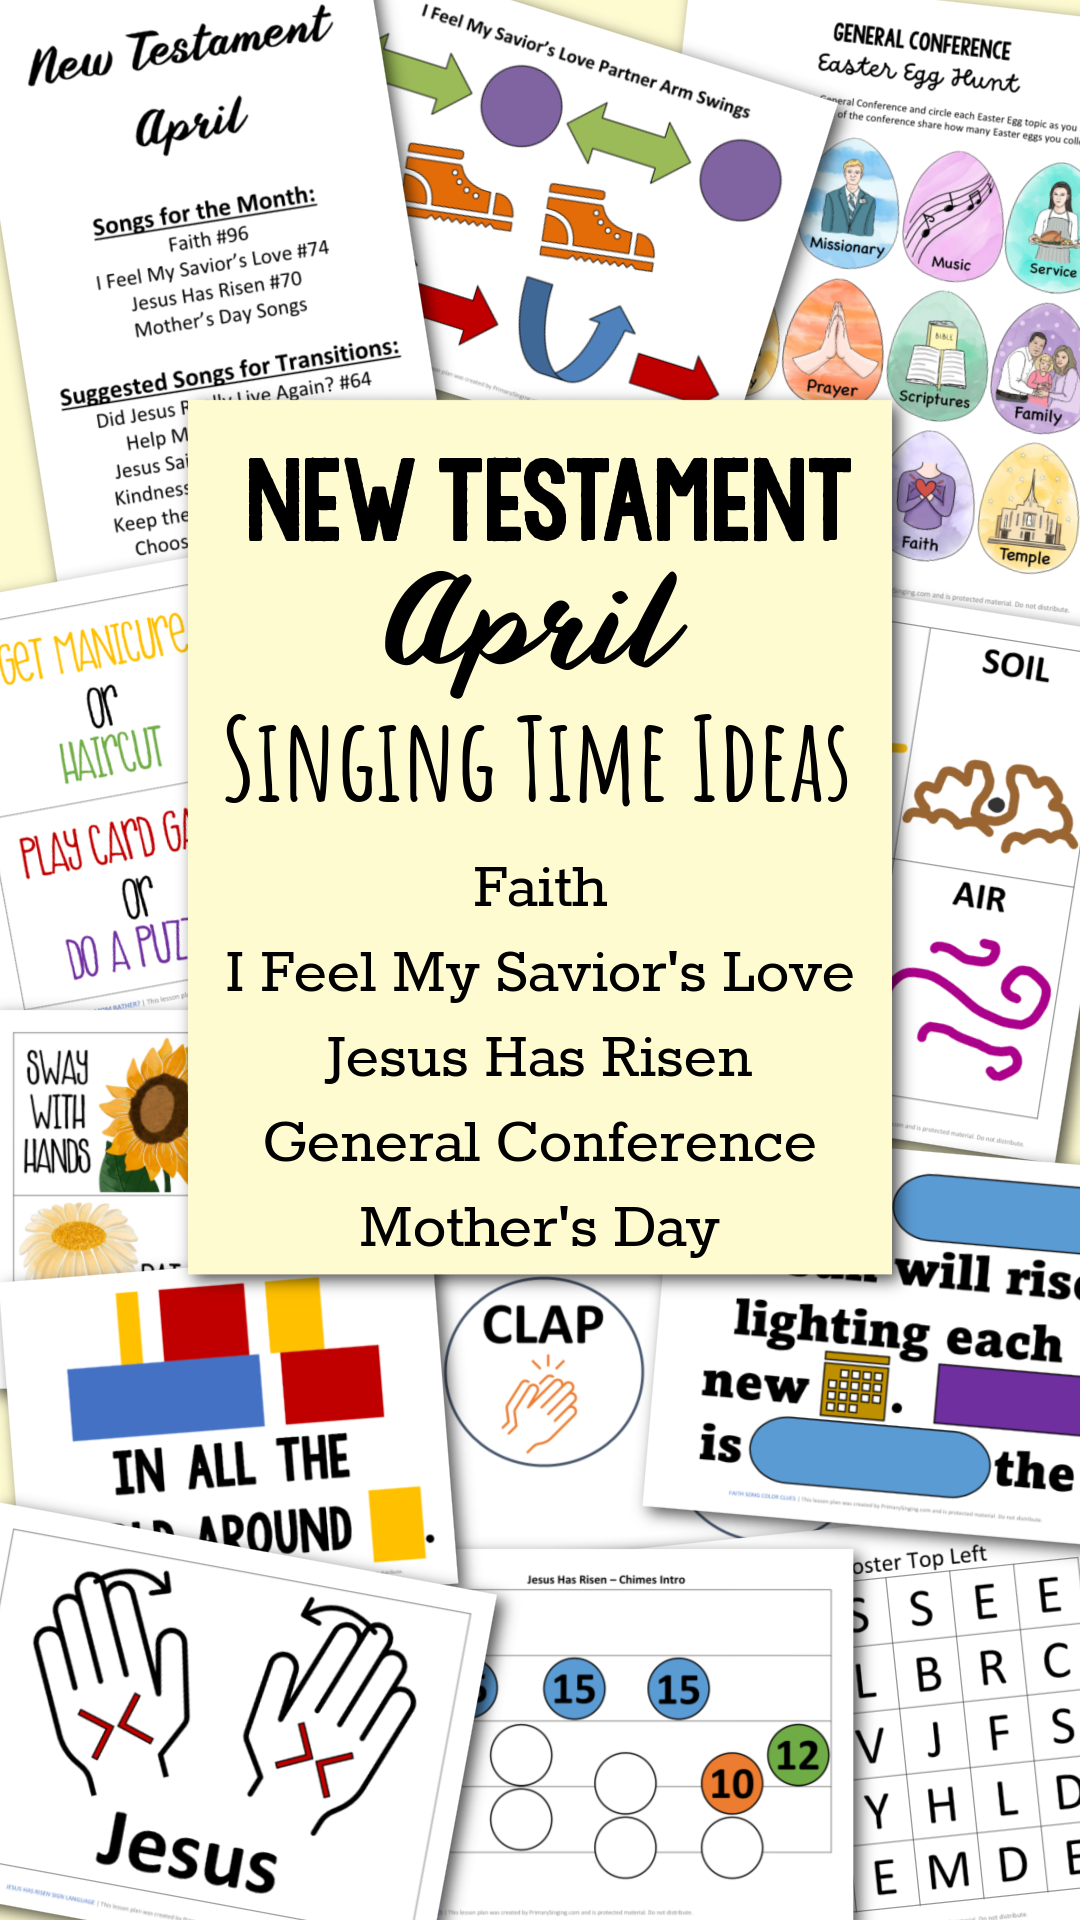 April New Testament Primary Songs - lots of fun singing time ideas for all of the Come Follow Me suggested songs of the month and holiday activities as well! Song helps for LDS Primary music leaders.